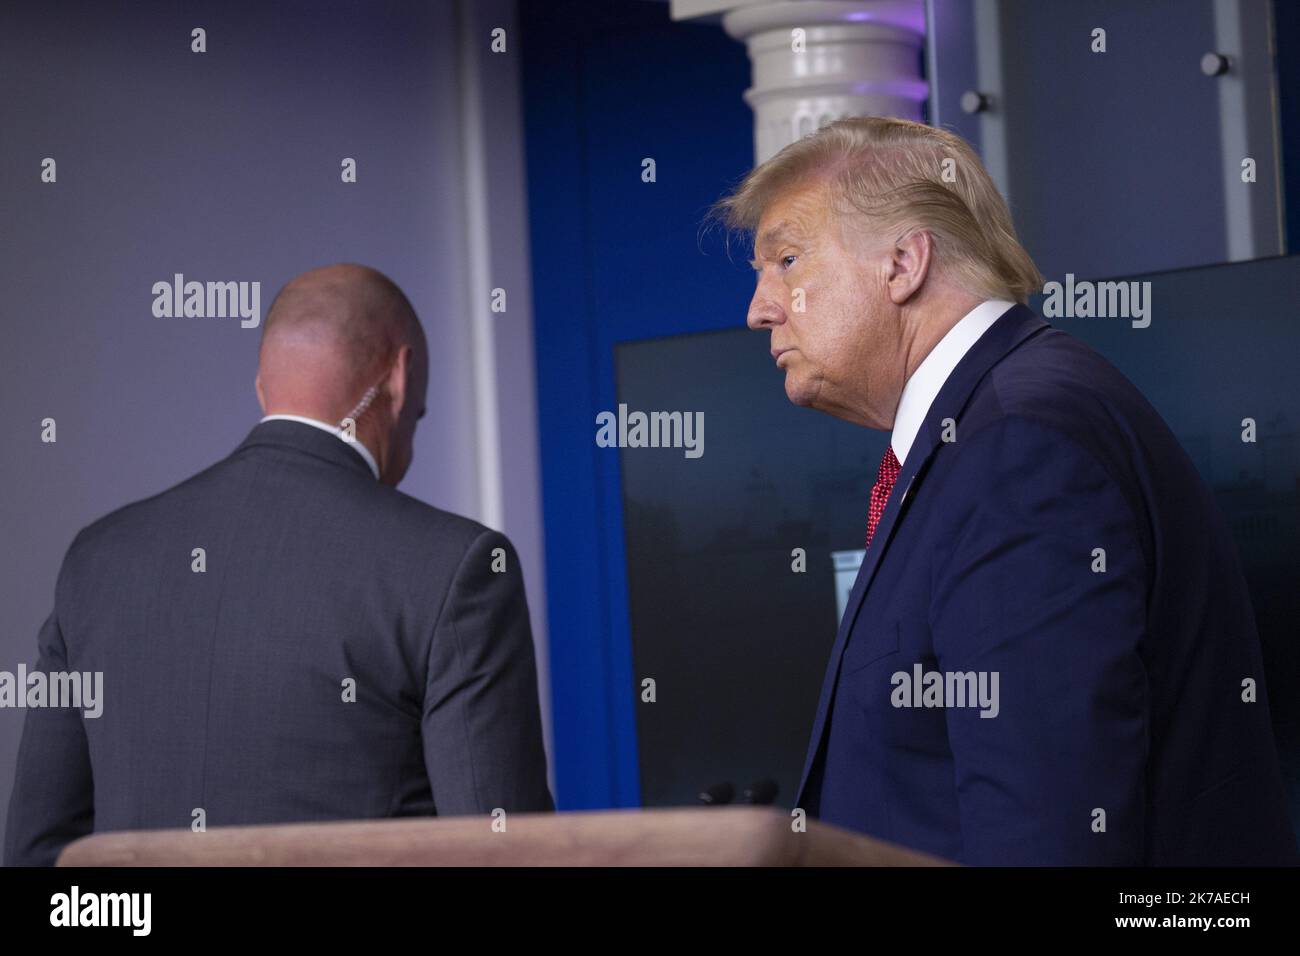 STEFANIE REYNOLDS/UPI/MAXPPP - President Donald Trump is removed from the White House Briefing Room by a US Secret Service agent during a press conference in Washington, DC on Monday, August 10, 2020. Photo by Stefani Reynolds/UPI Stock Photo